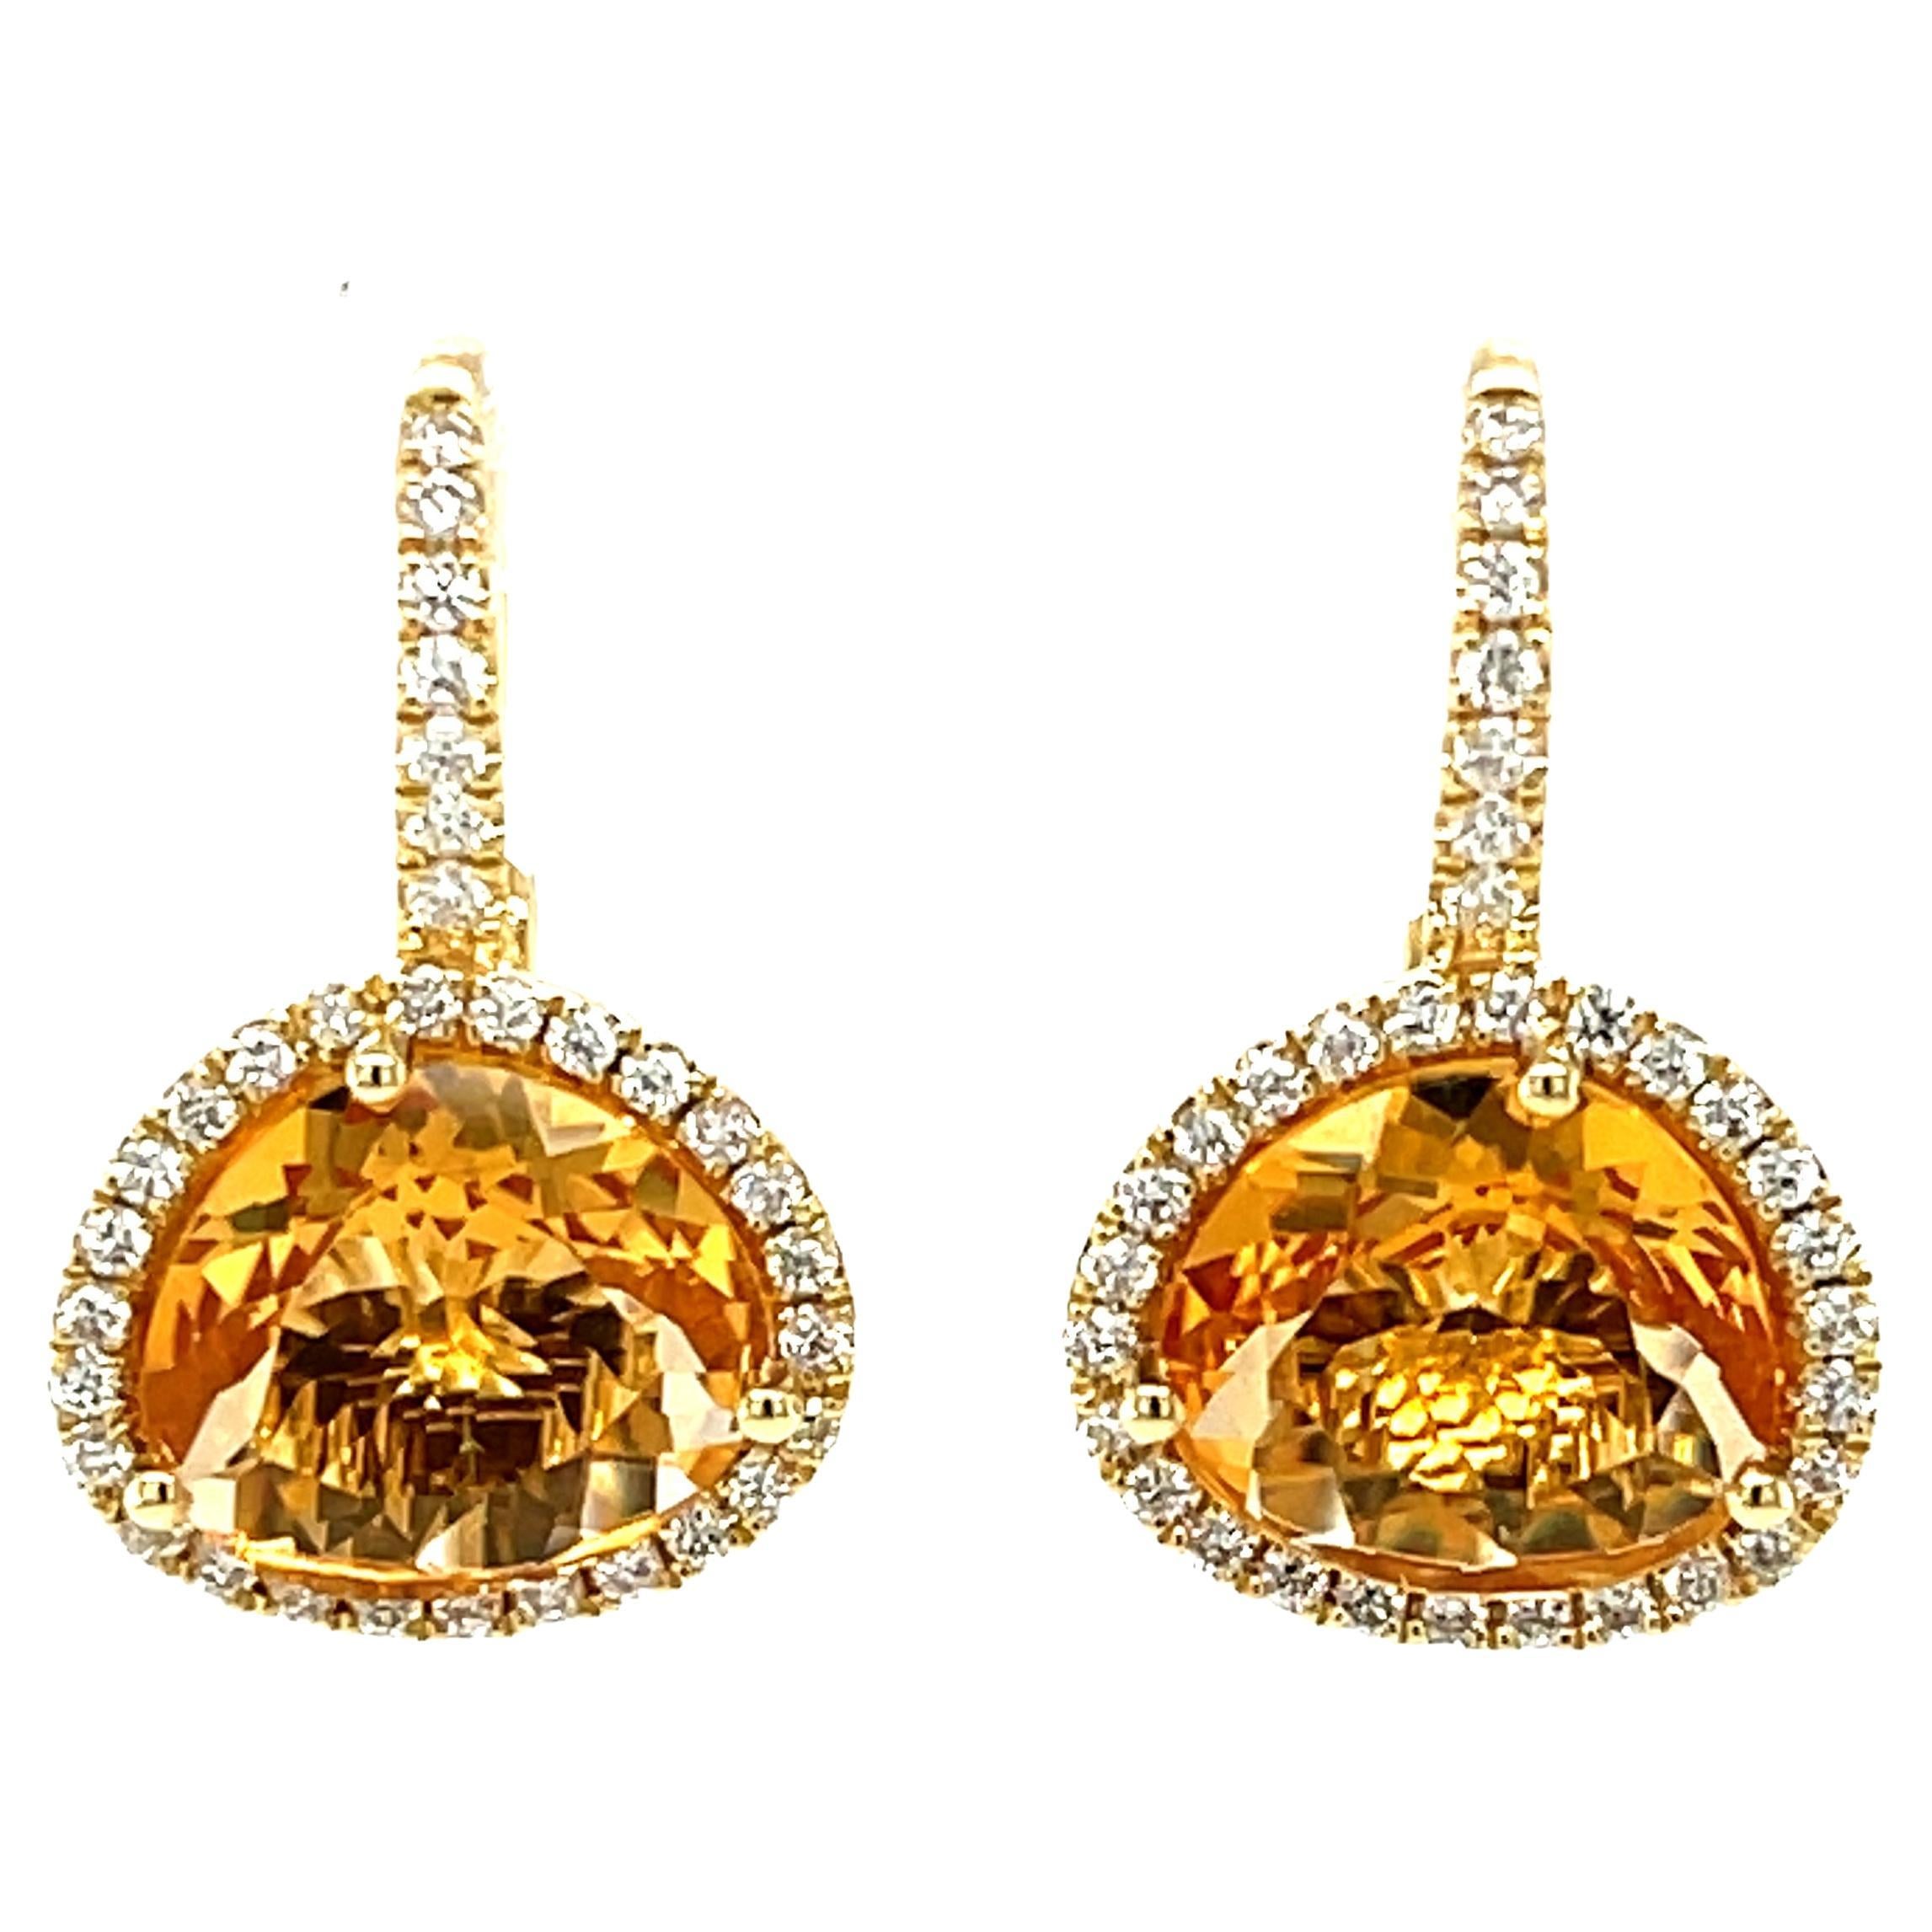 These pretty drop earrings feature crystal clear citrine 